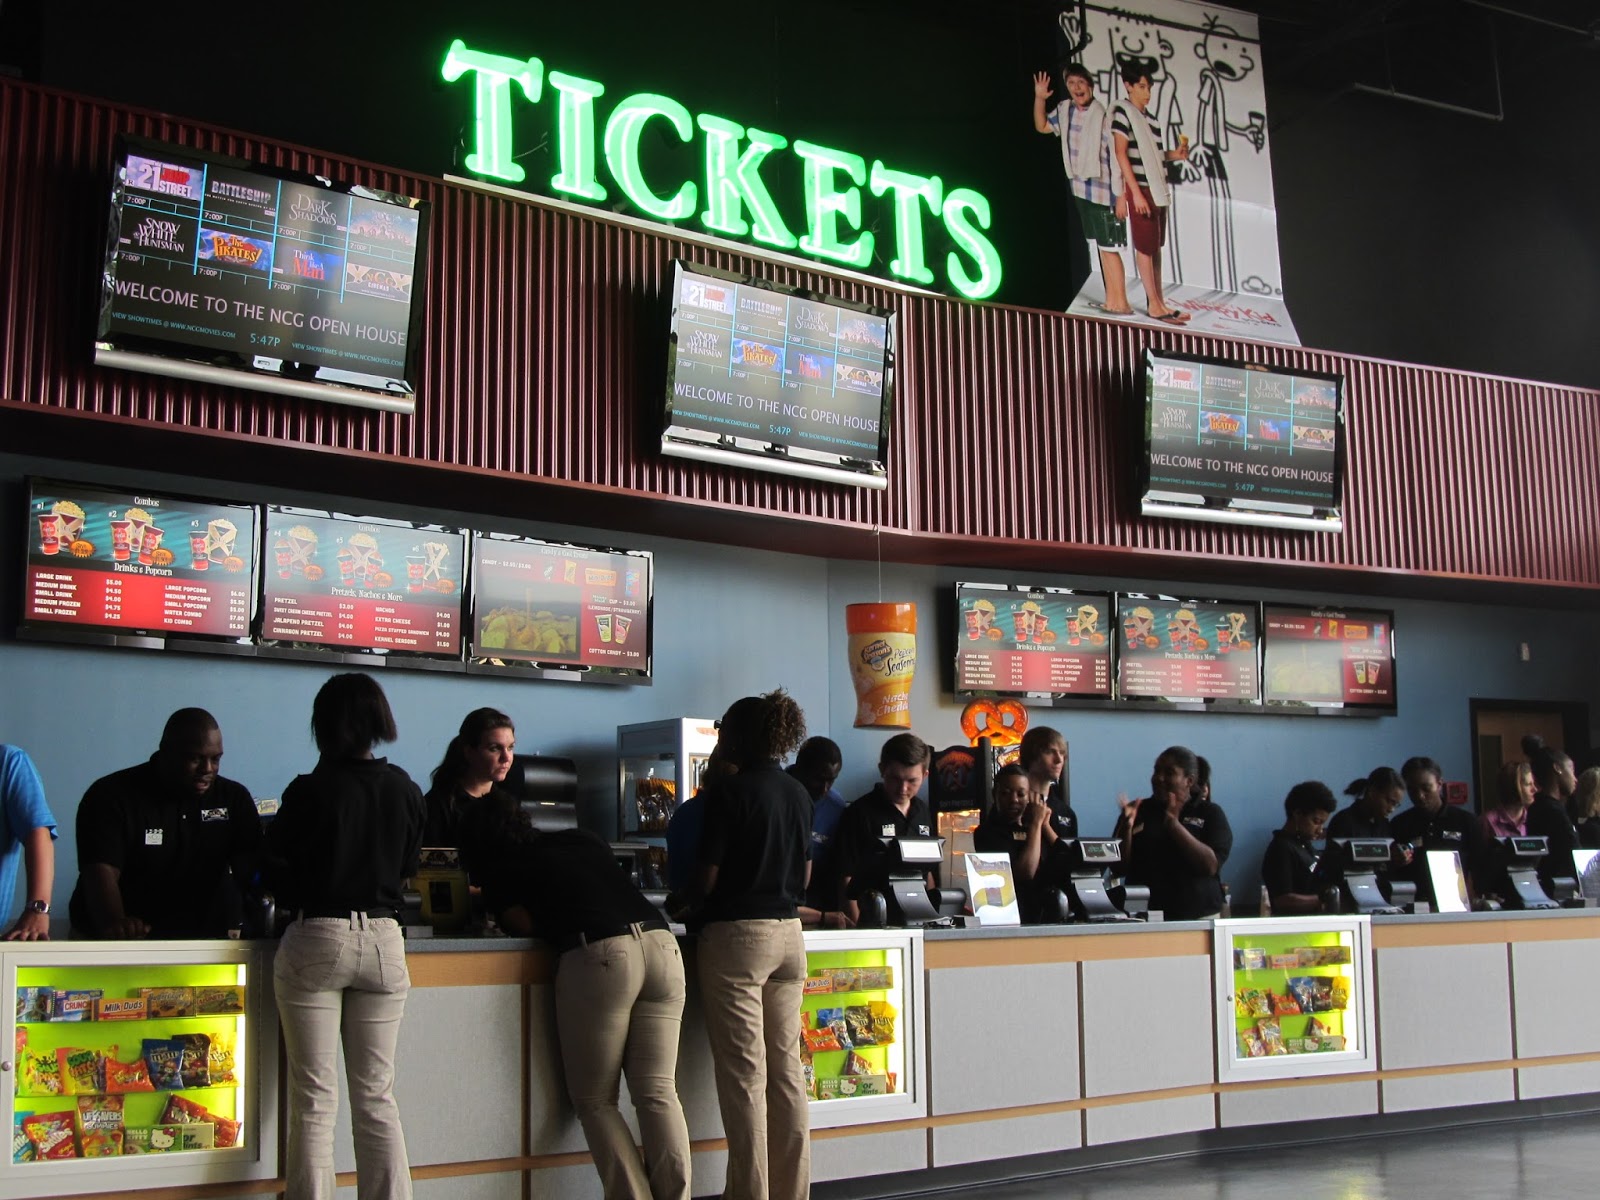 Ticket box office. Buying tickets at the Cinema. Box Office movie. Cinema ticket Office. Buy tickets in the Cinema.